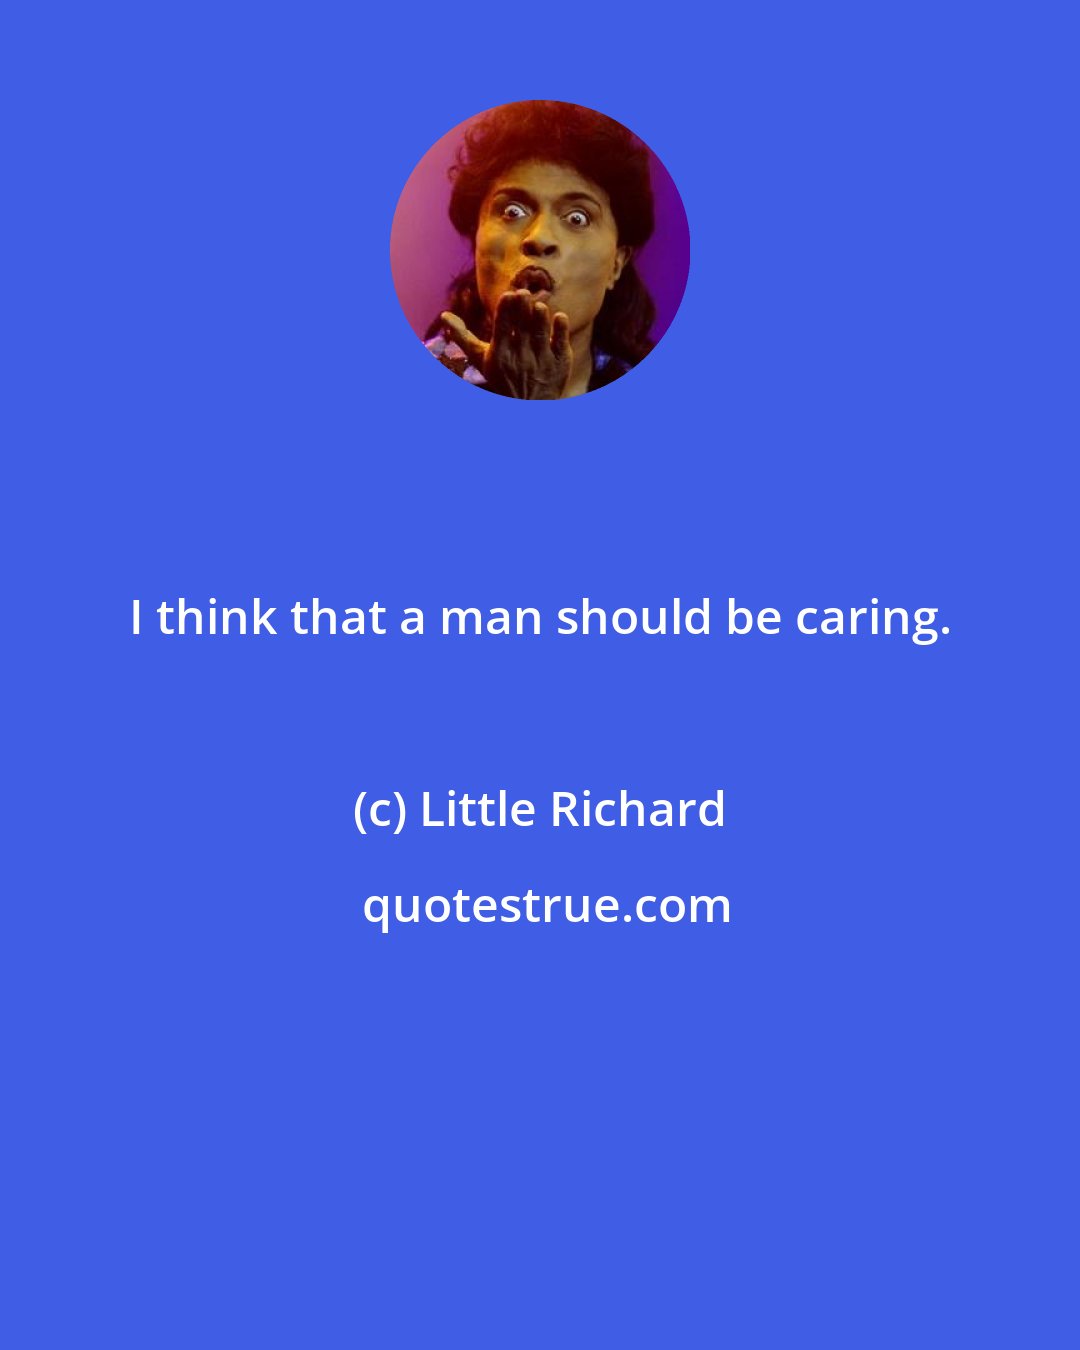 Little Richard: I think that a man should be caring.